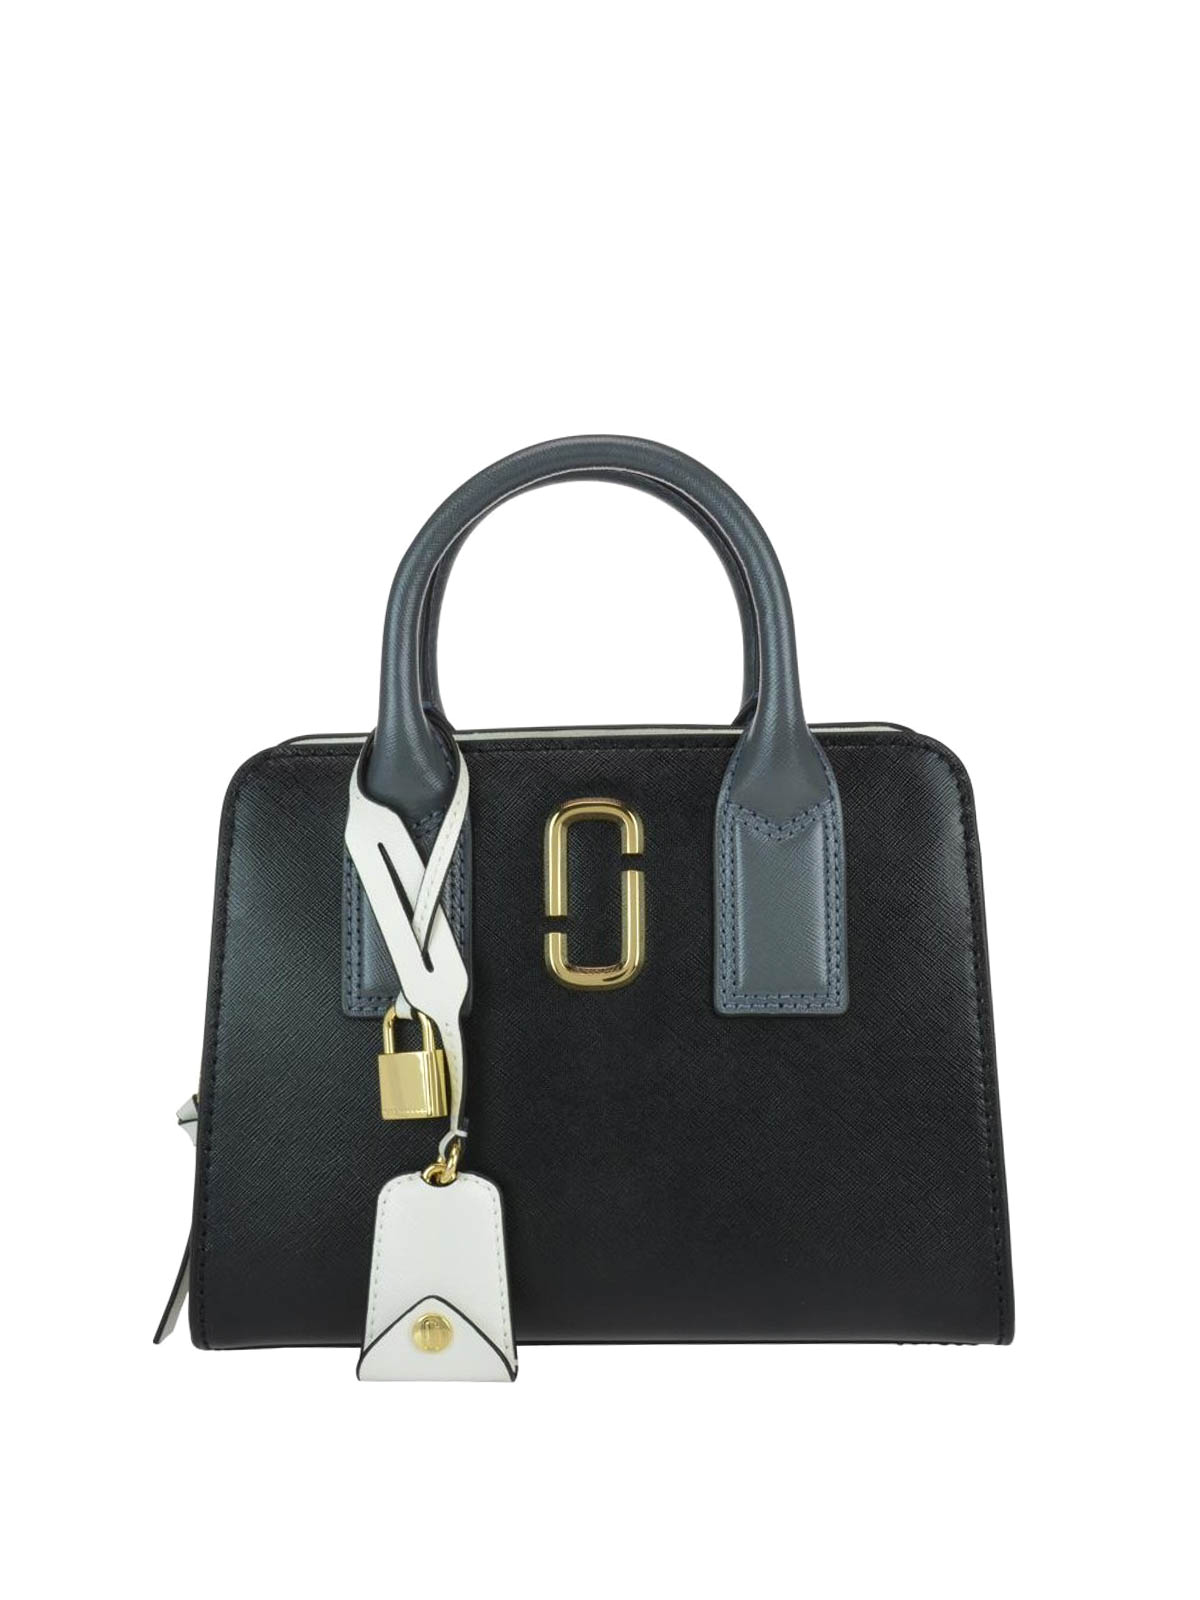 Totes bags Marc Jacobs - Little Big Shot black leather tote bag 